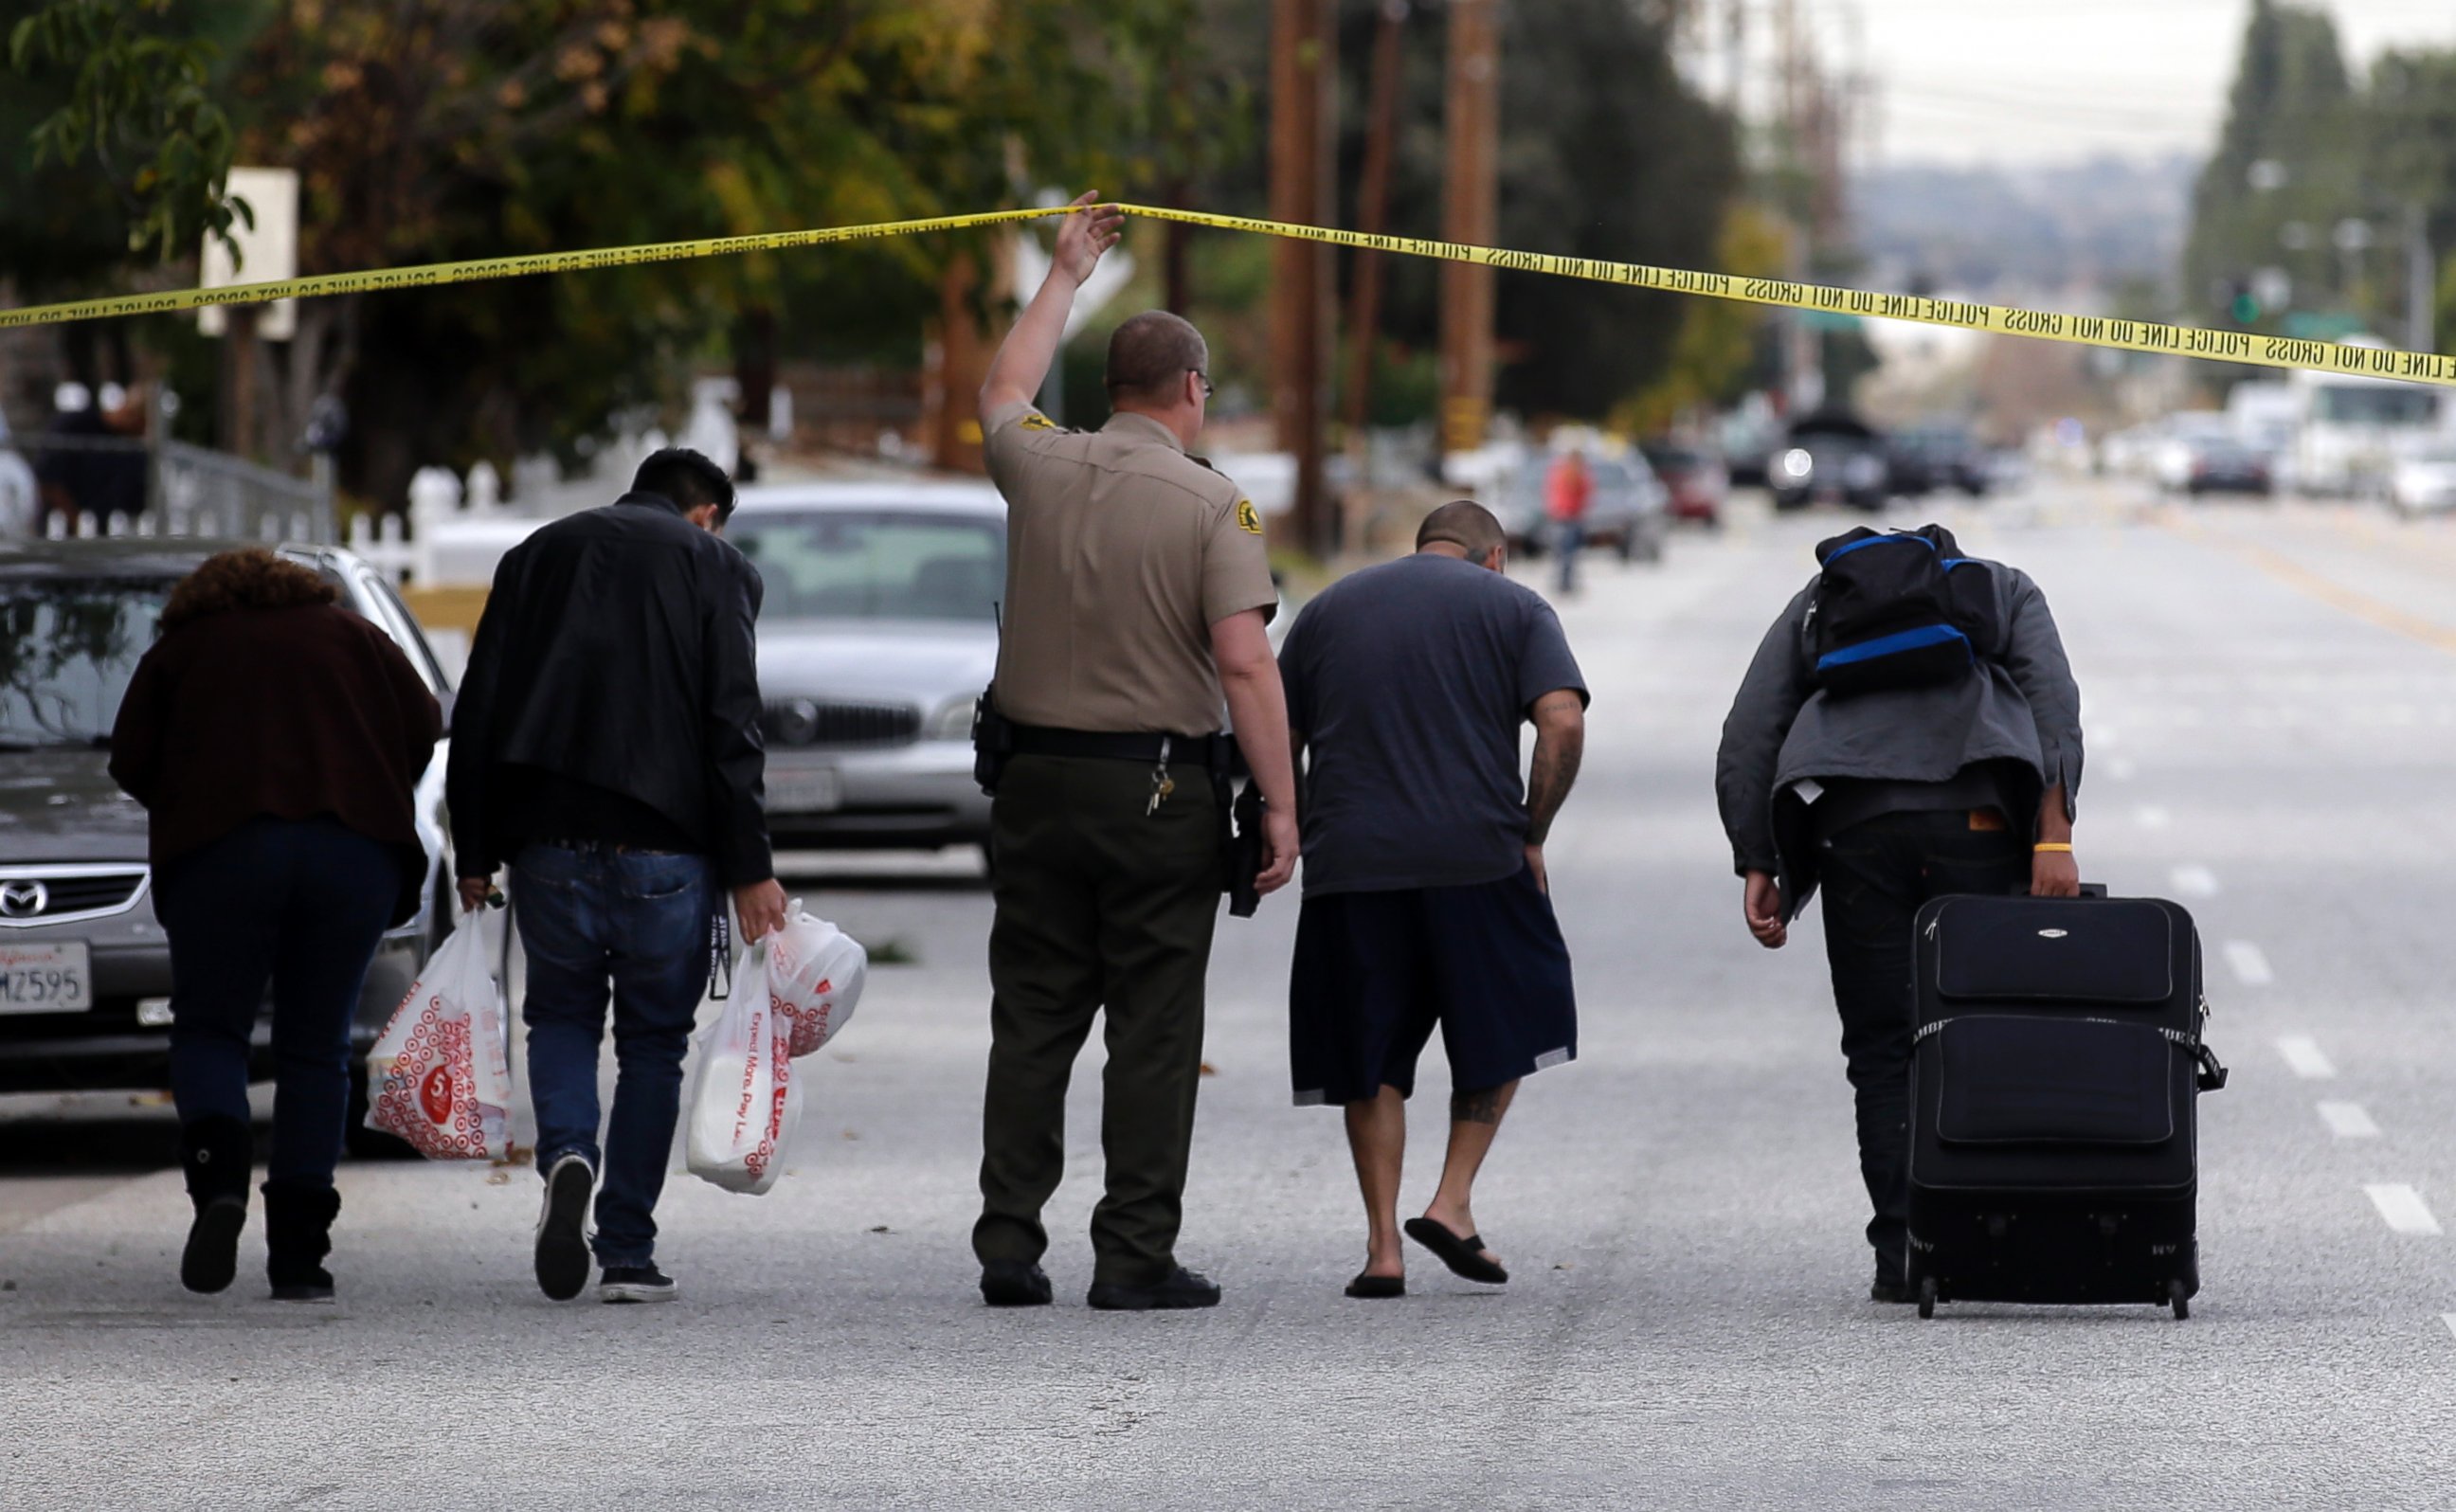 PHOTO: Residents are escorted to their homes near a Black SUV that was involved in a police shootout with shooting suspects, Dec. 3, 2015, in San Bernardino, Calif.